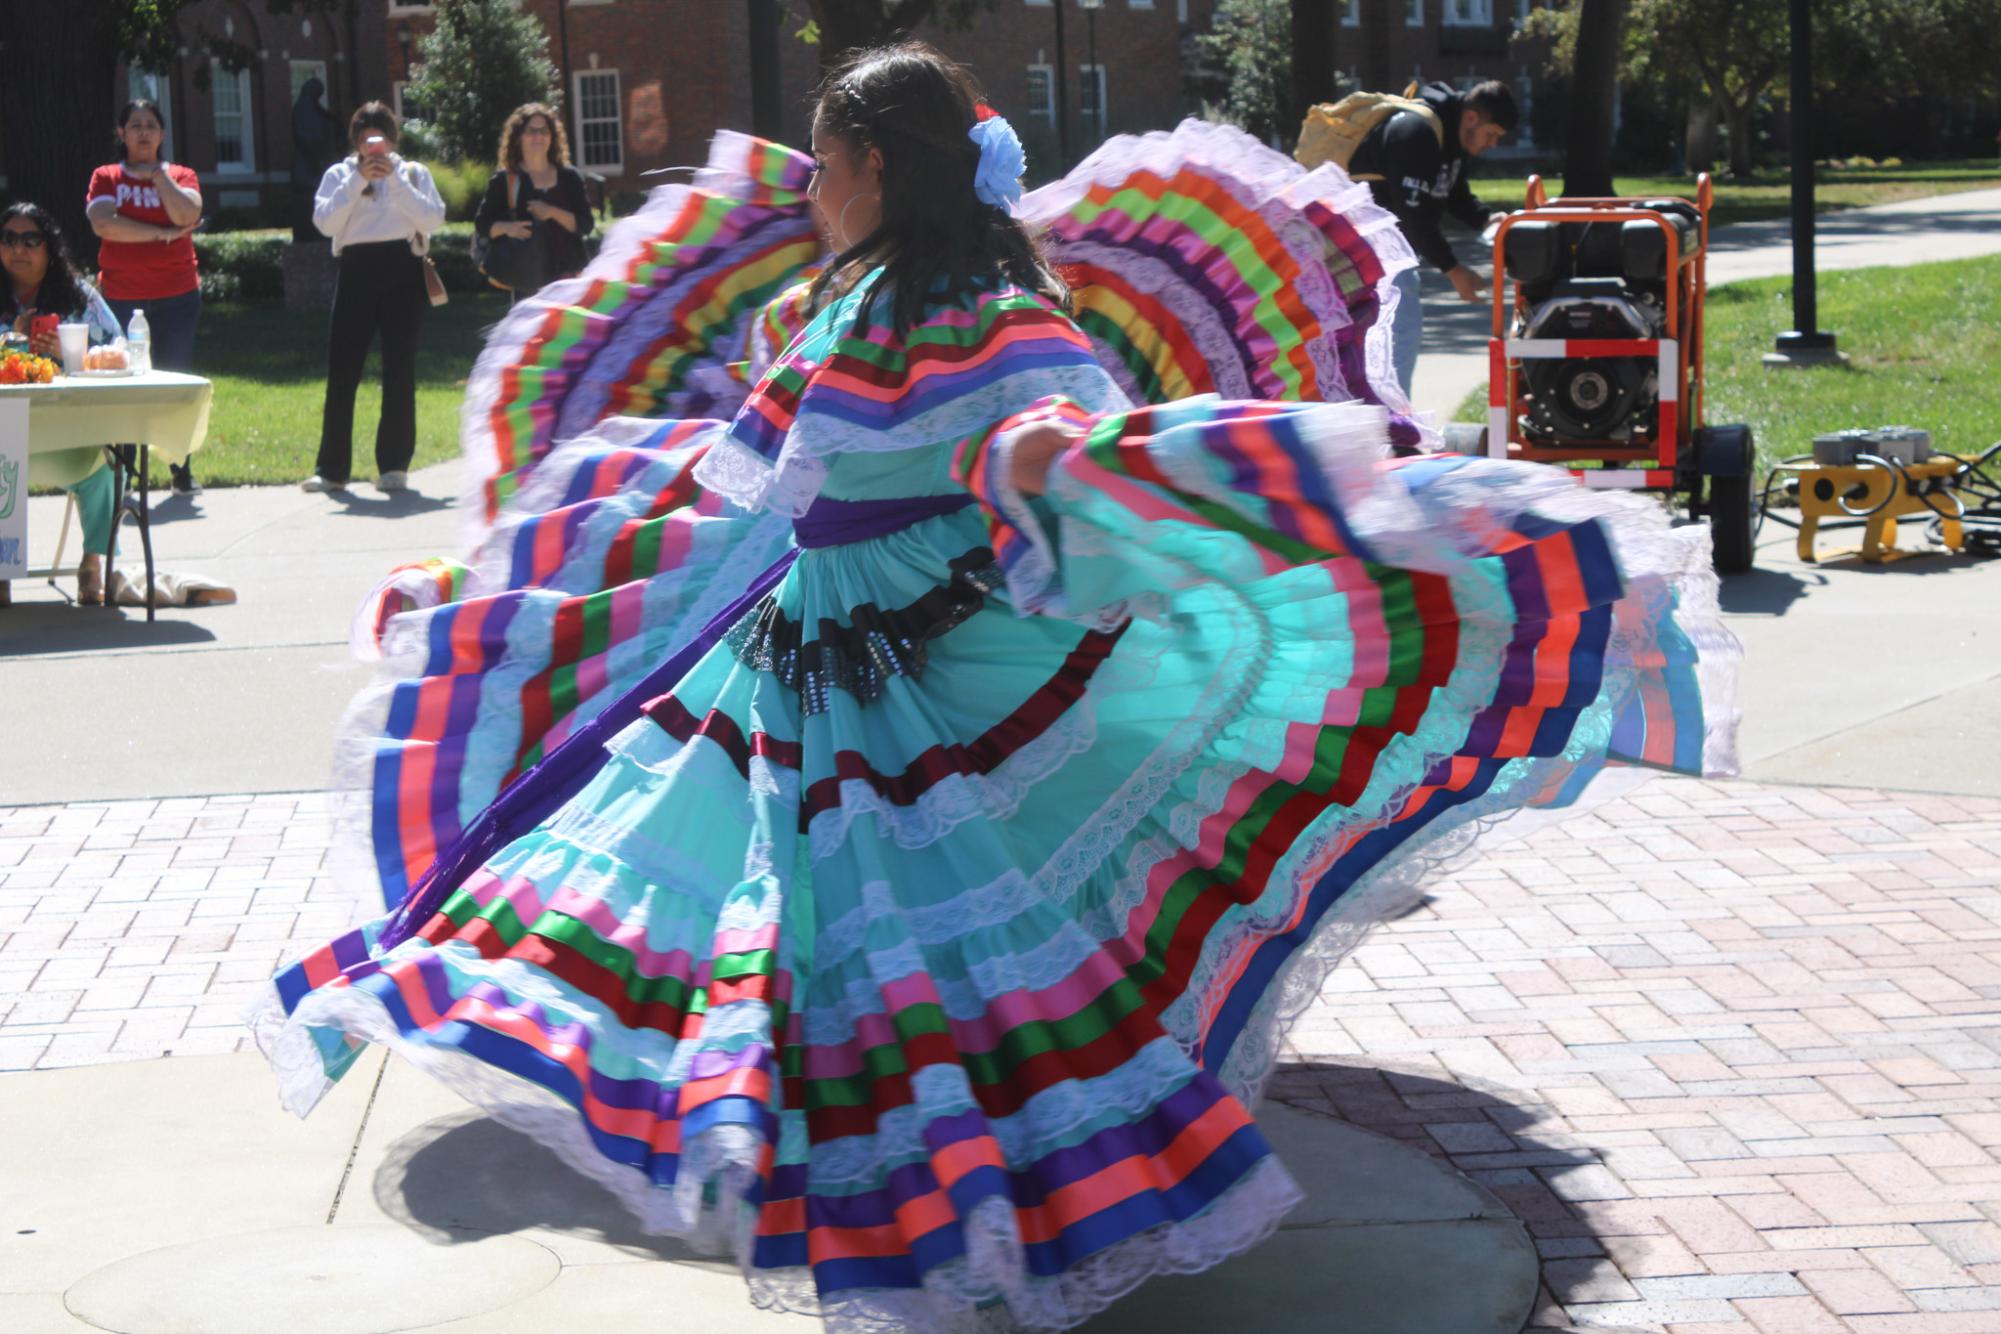 Raices De Mi Tierra Ballet Folklórico dancers performed baile folklórico or folkloric dance in Echo Circle at the Office of Diversity and Inclusions Flavors of Latin America event on Oct. 9.